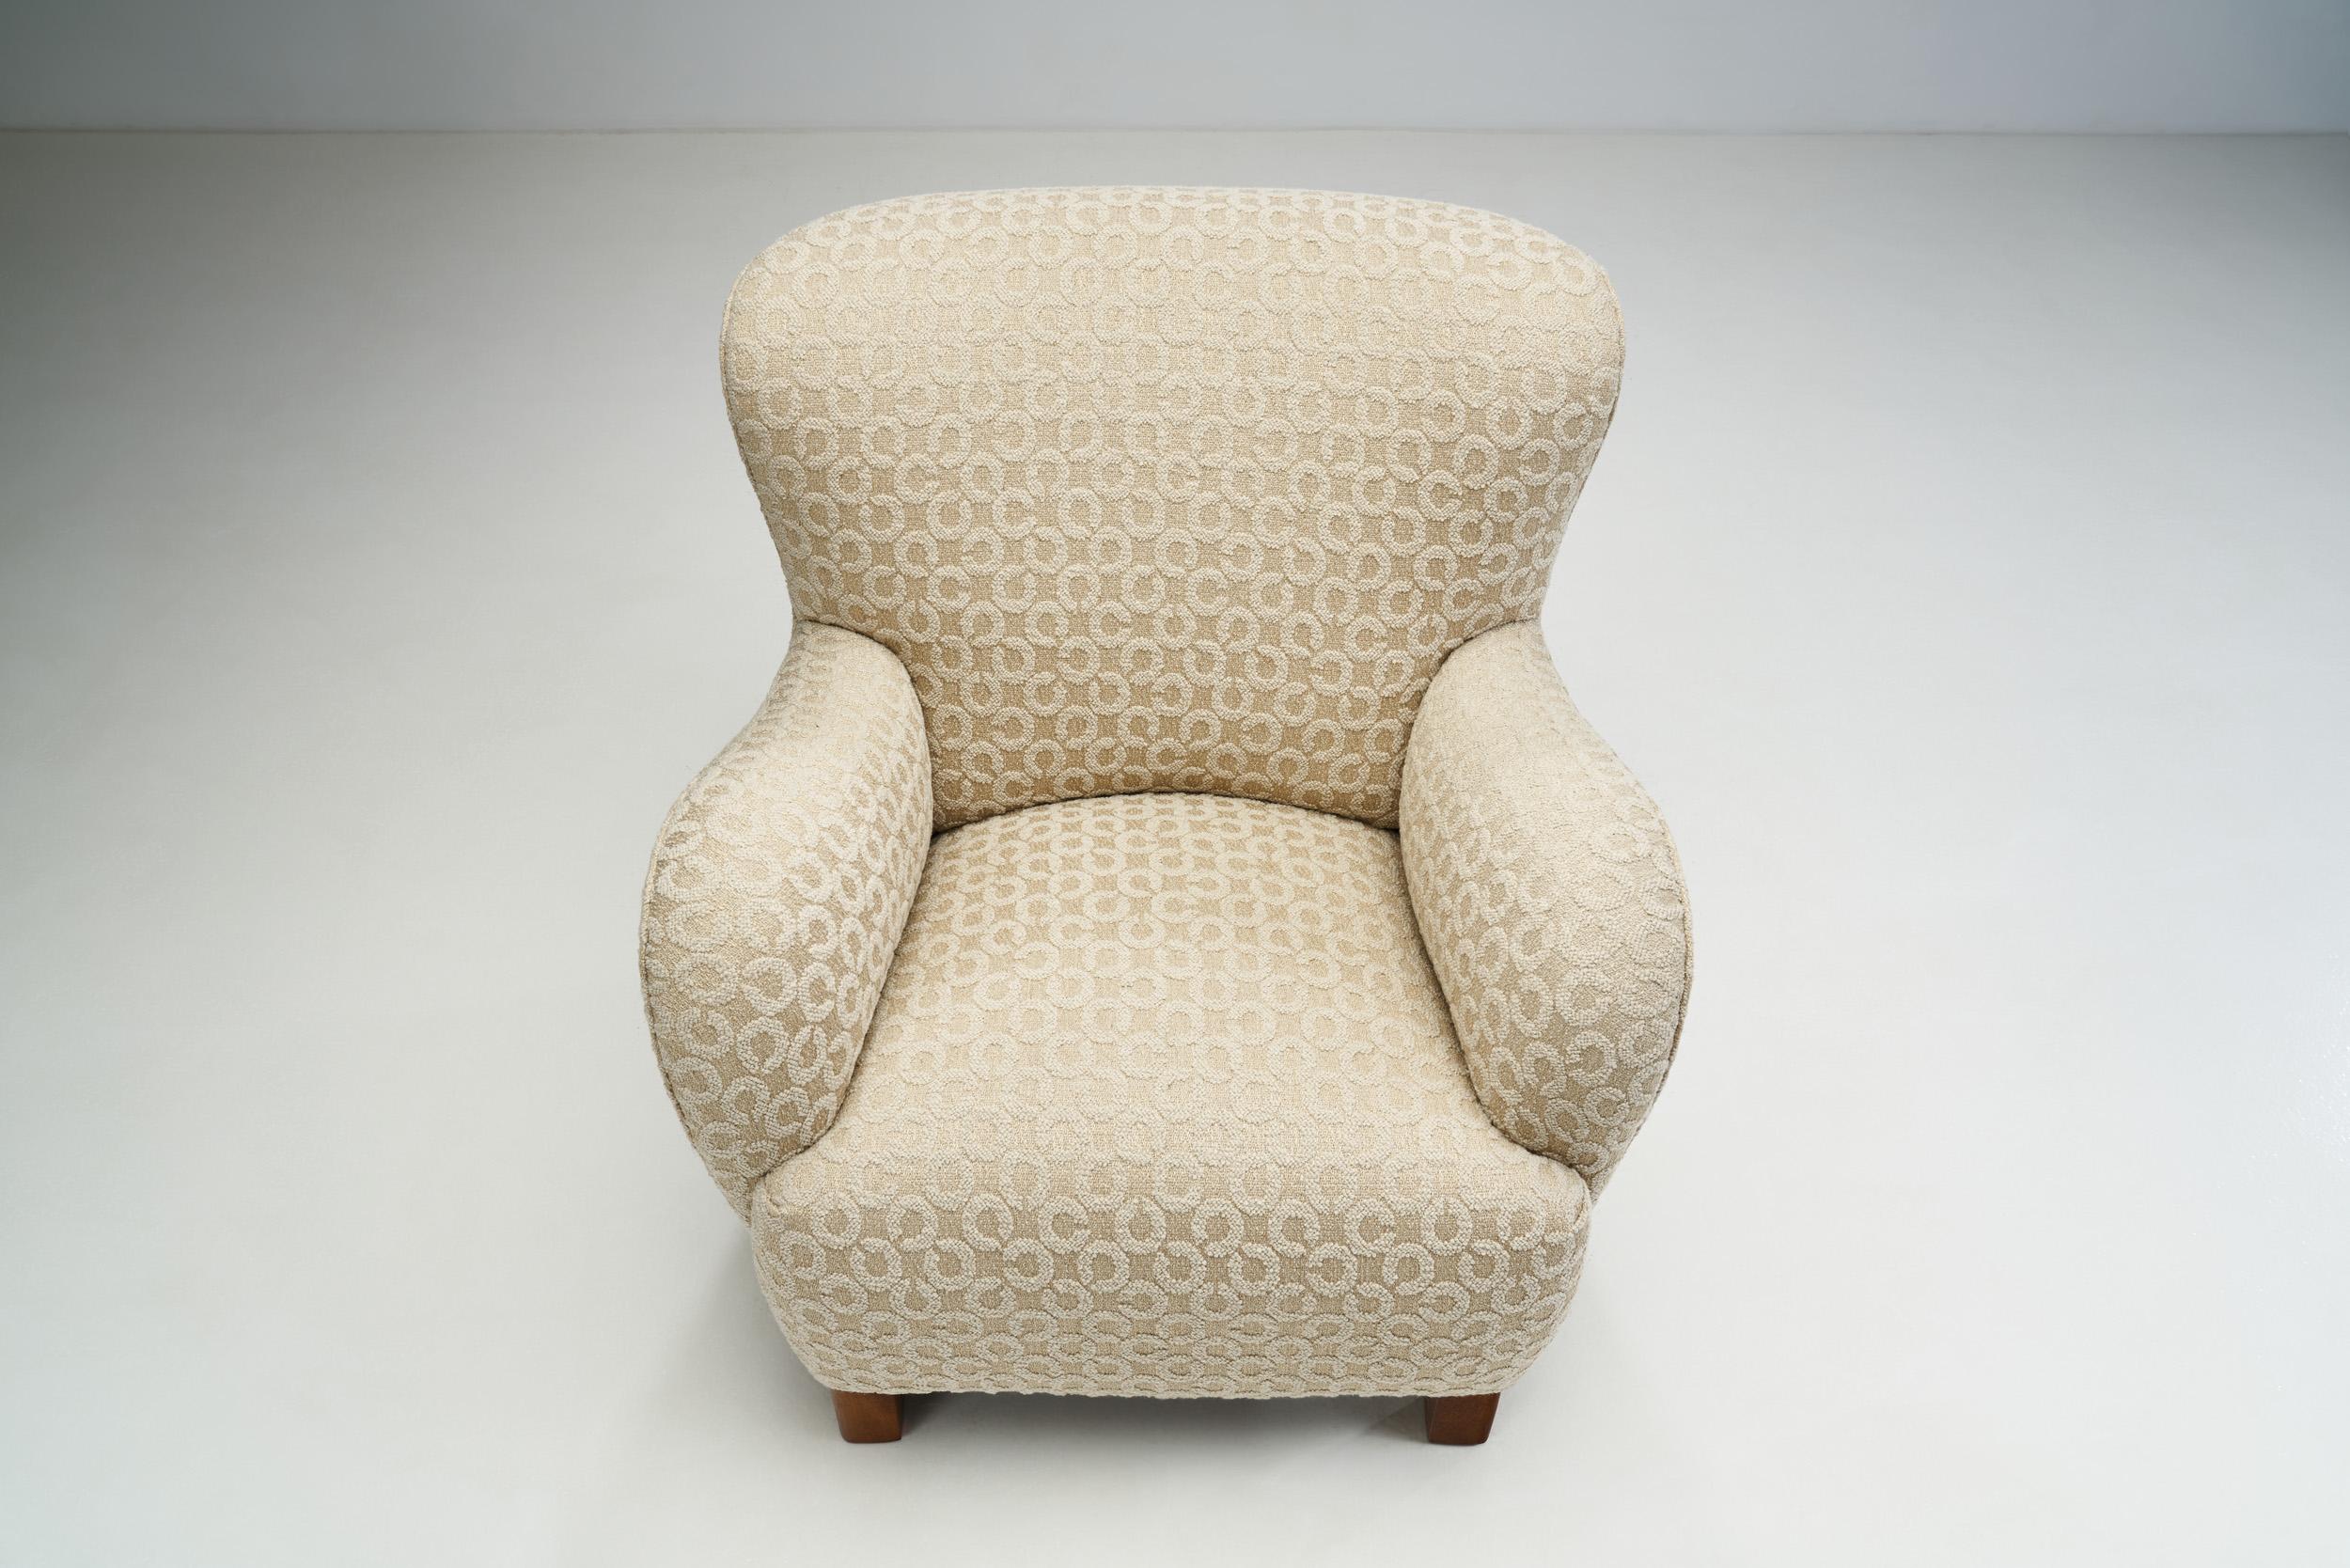 Danish Cabinetmaker Armchair with Patterned Upholstery, Denmark, 1940s For Sale 4